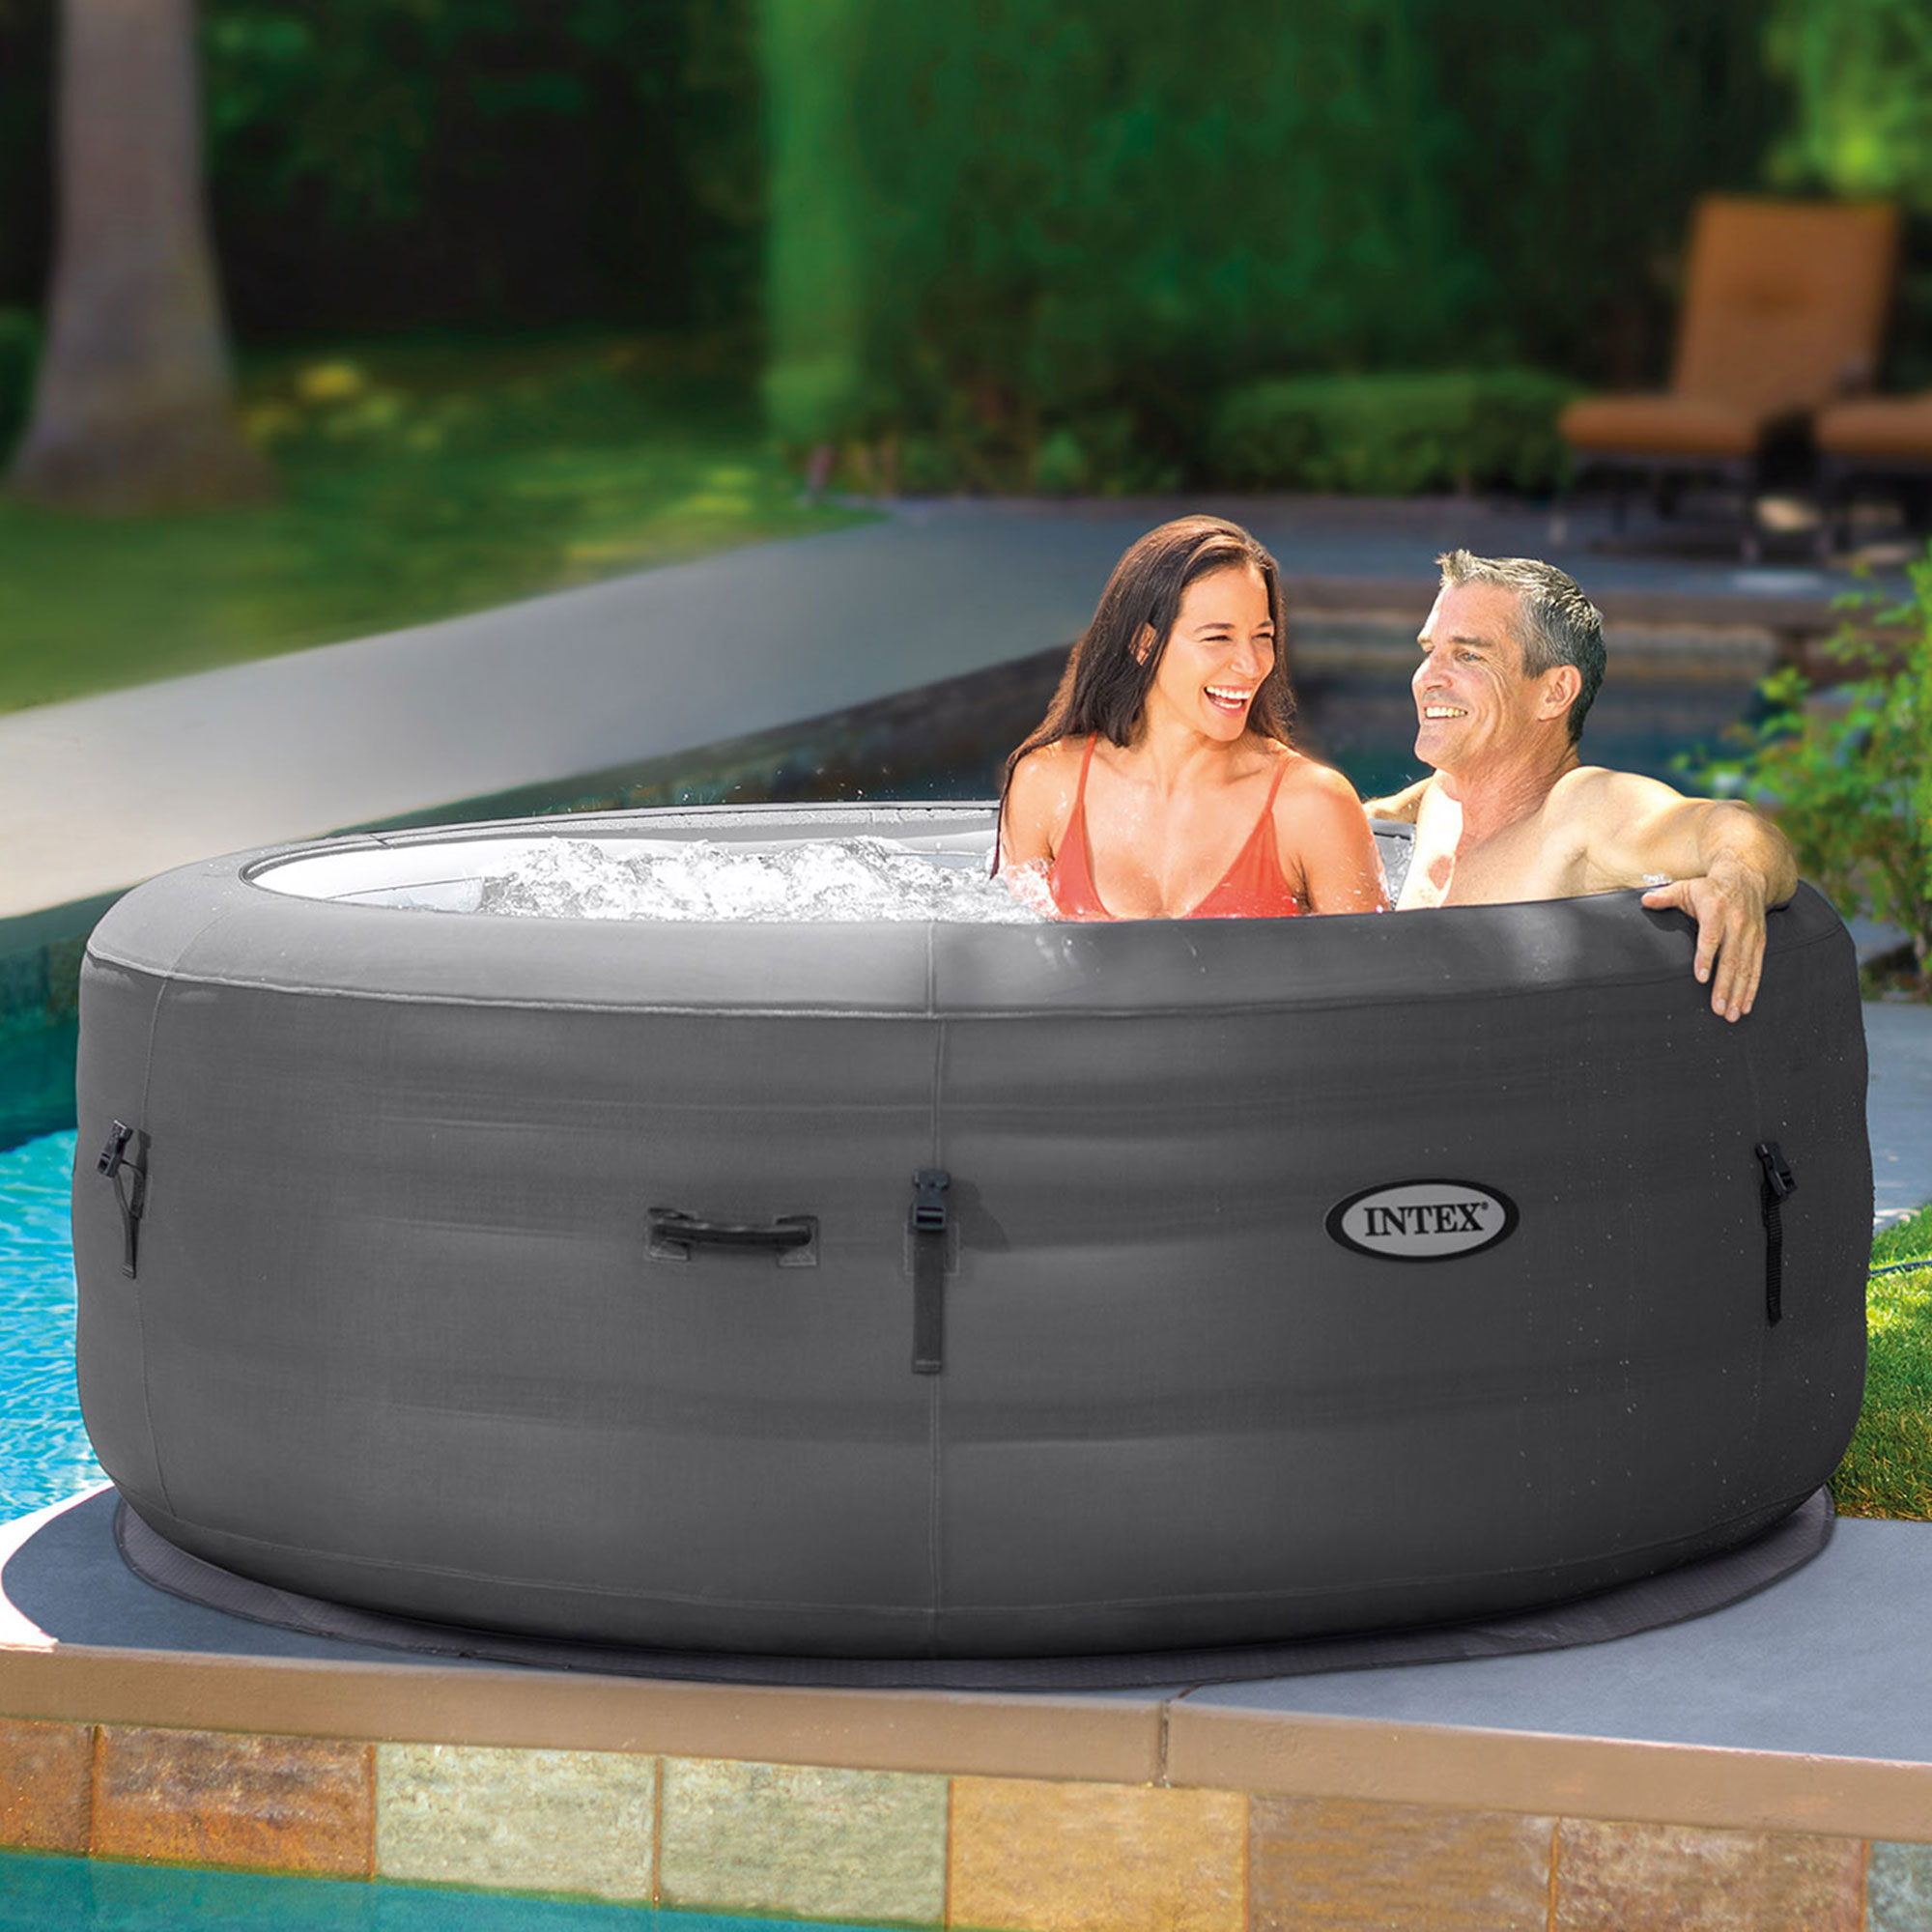 Intex 28481E Simple Spa 77in x 26in Inflatable Hot Tub with Filter Pump & Cover - image 5 of 11